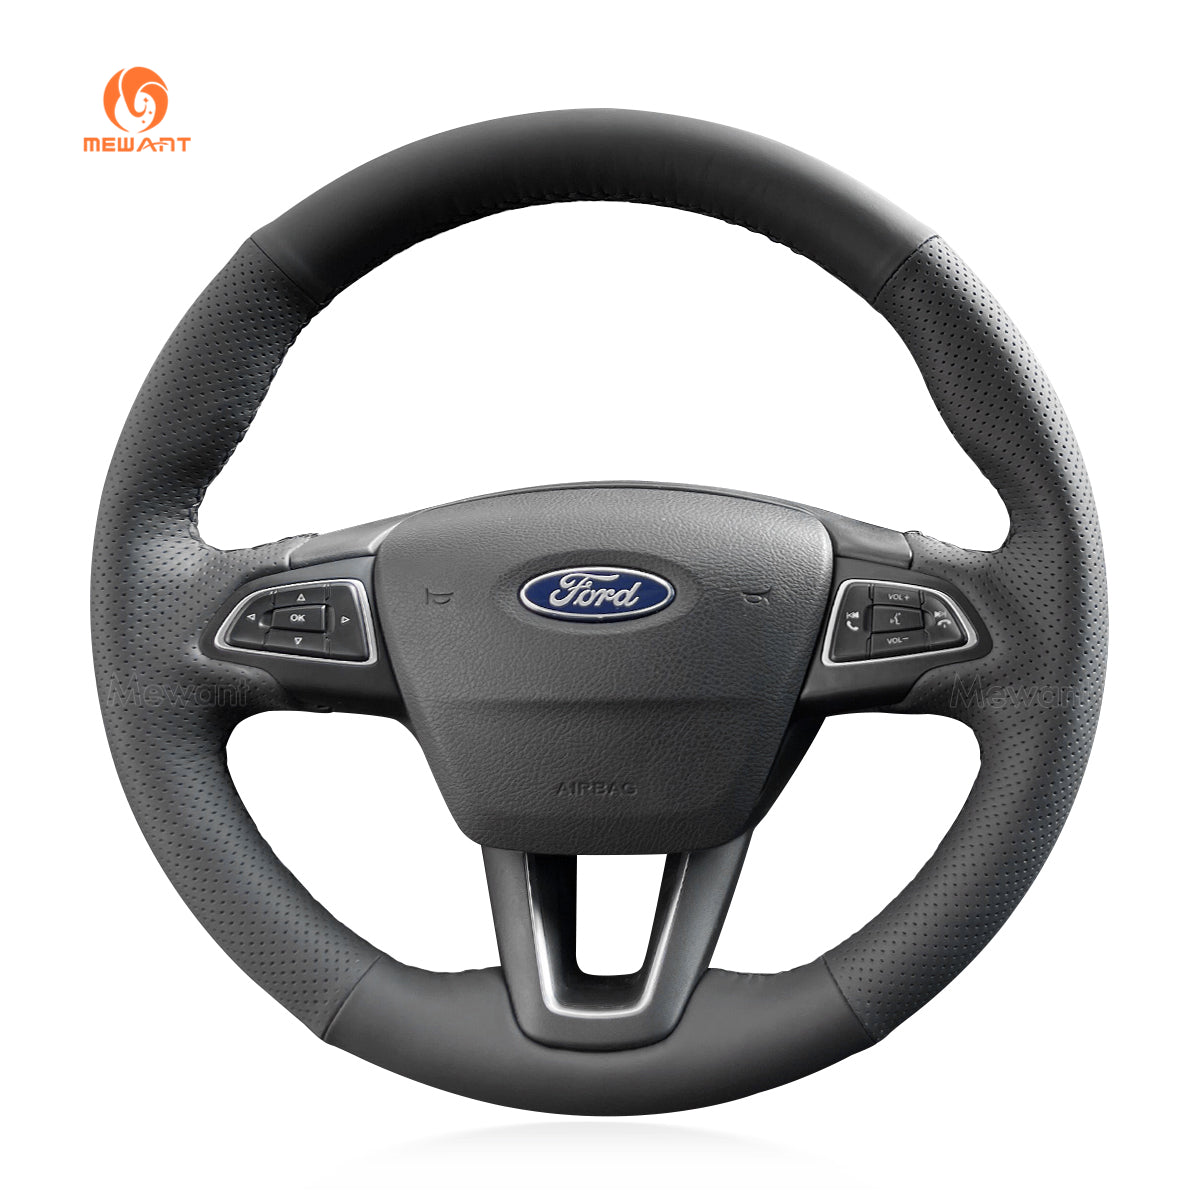 MEWANT Hand Stitch Car Steering Wheel Cover for Ford Focus Kuga C-MAX (Grand C-Max) Ecosport